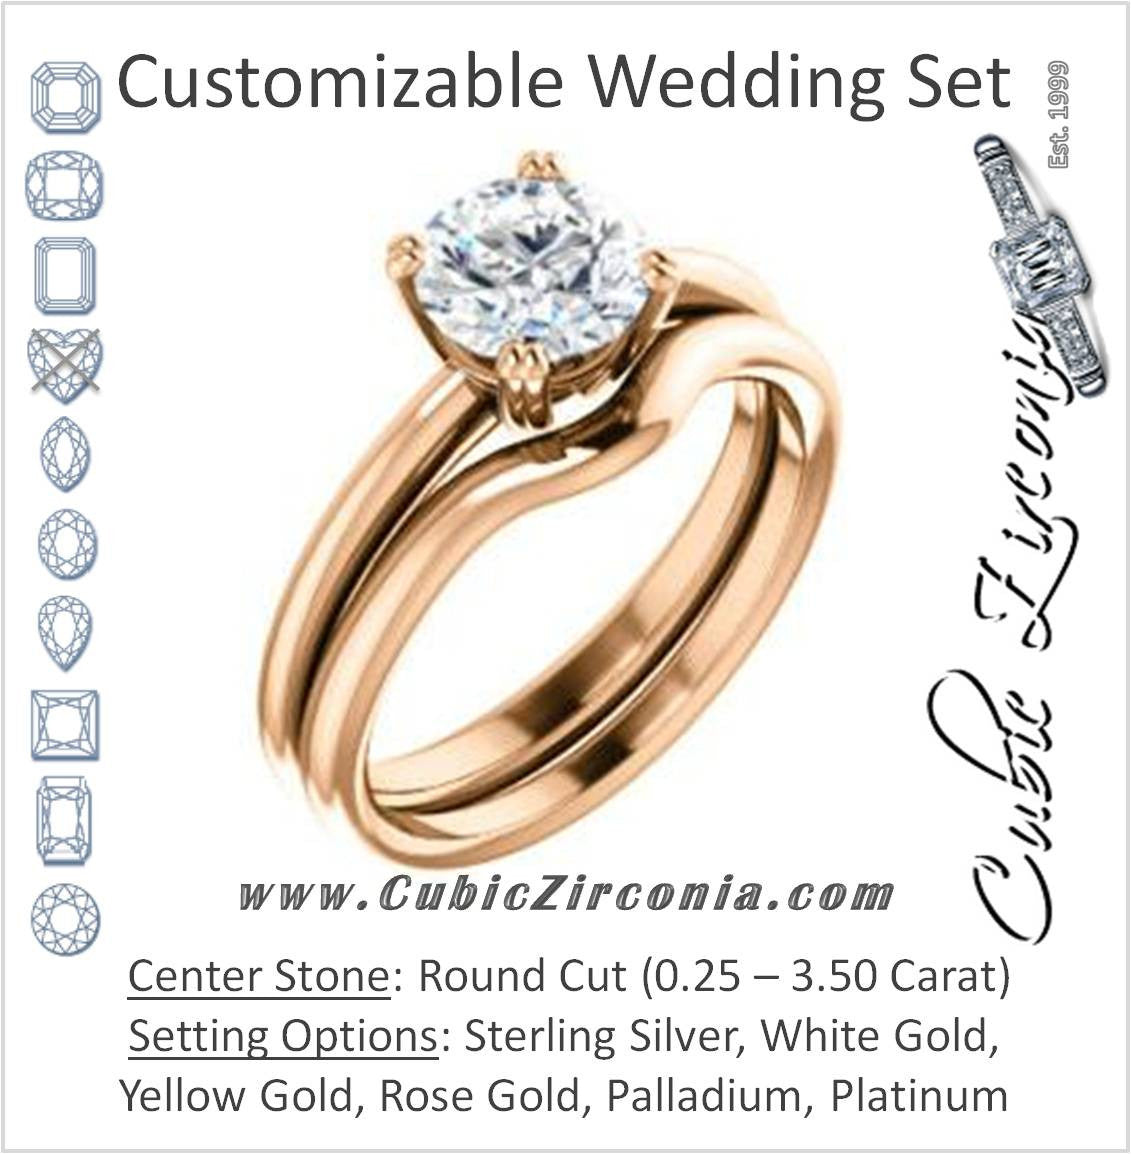 CZ Wedding Set, featuring The Venusia engagement ring (Customizable Round Cut Solitaire with Thin Band)